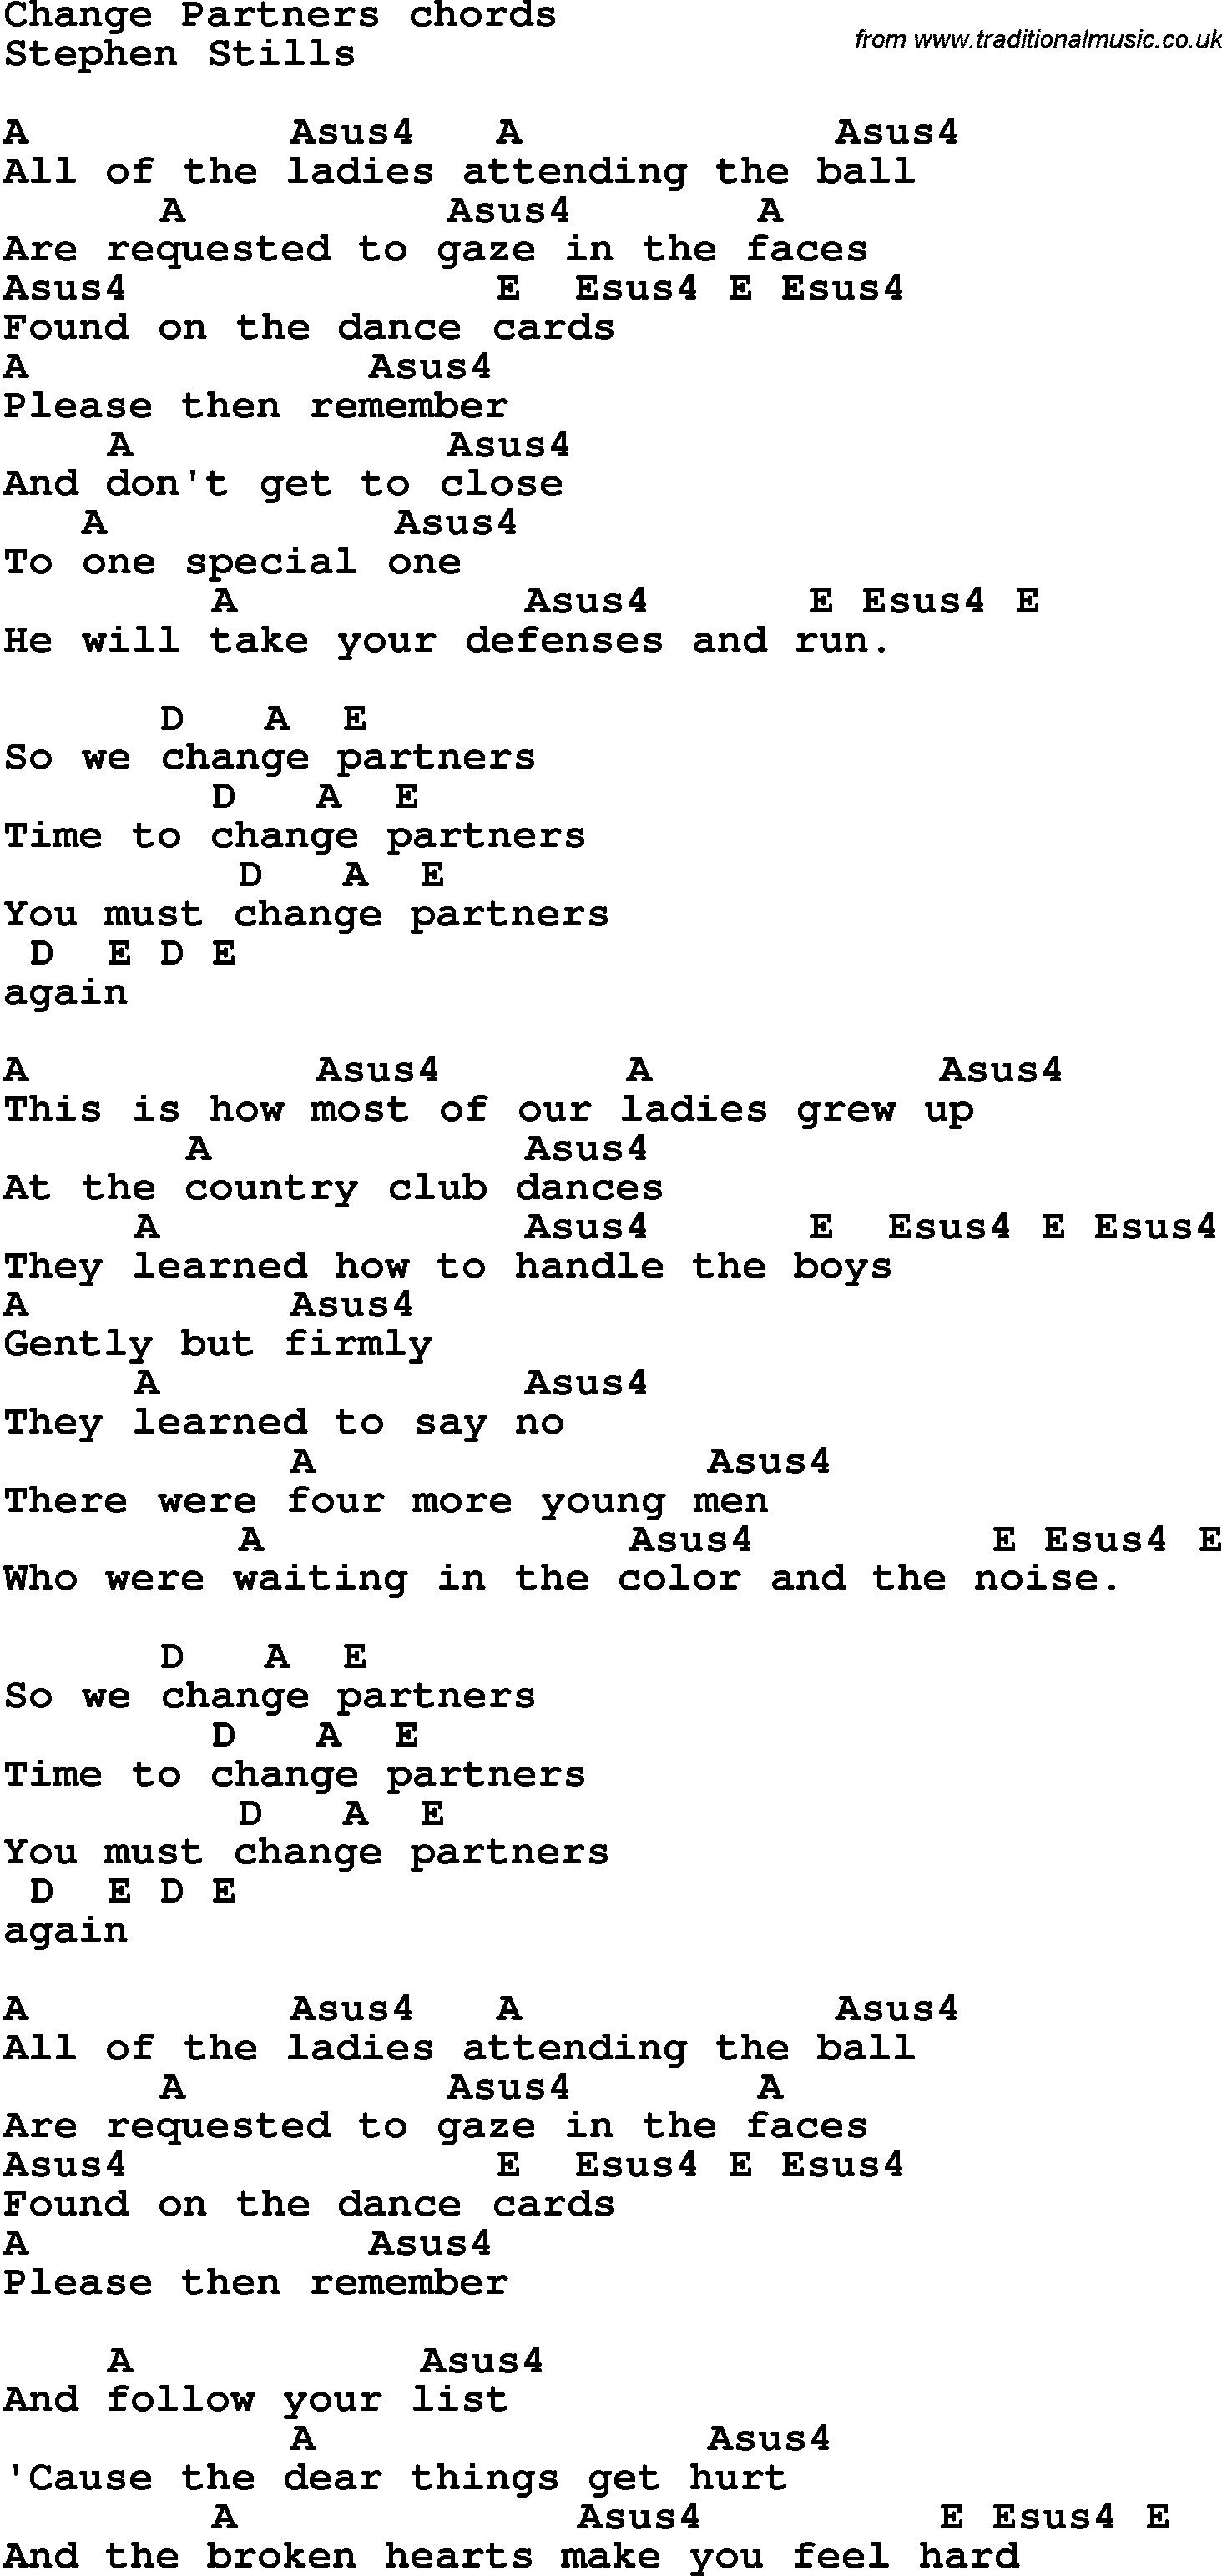 Song Lyrics with guitar chords for Change Partners - Stephen Stills